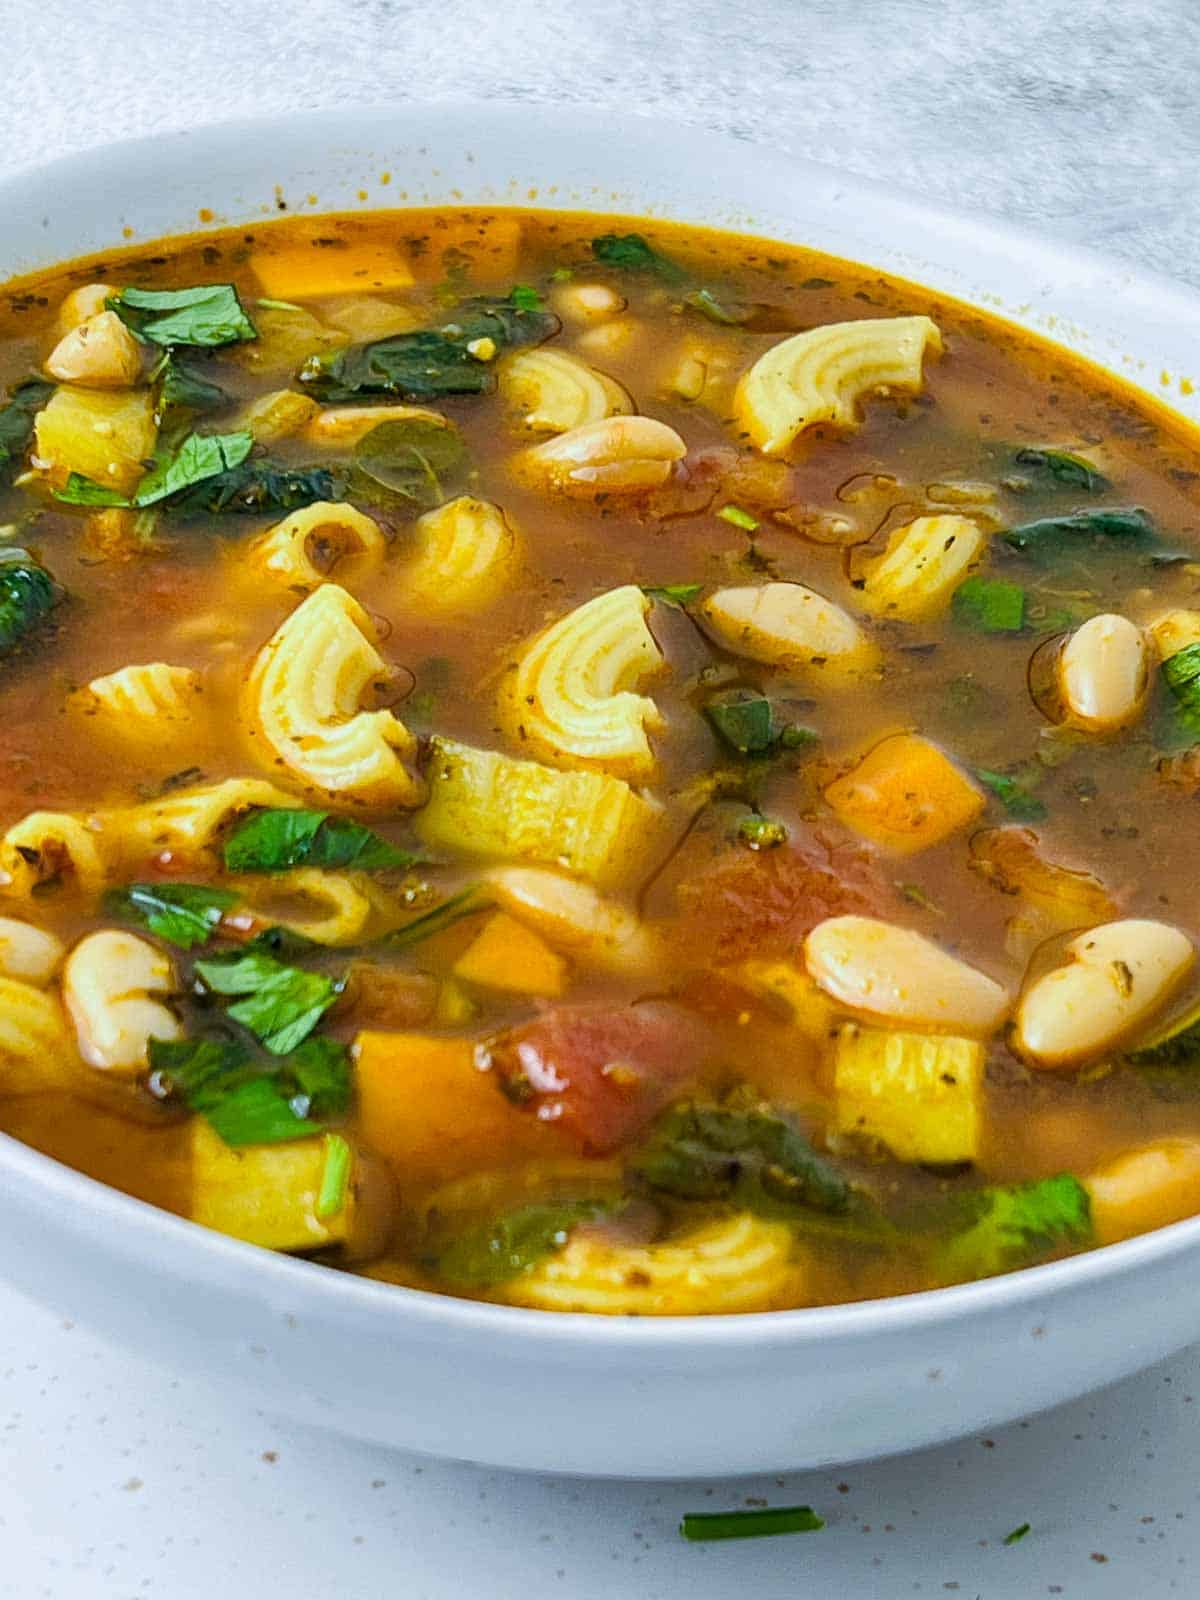 Minestrone soup garnished with fresh parsley.